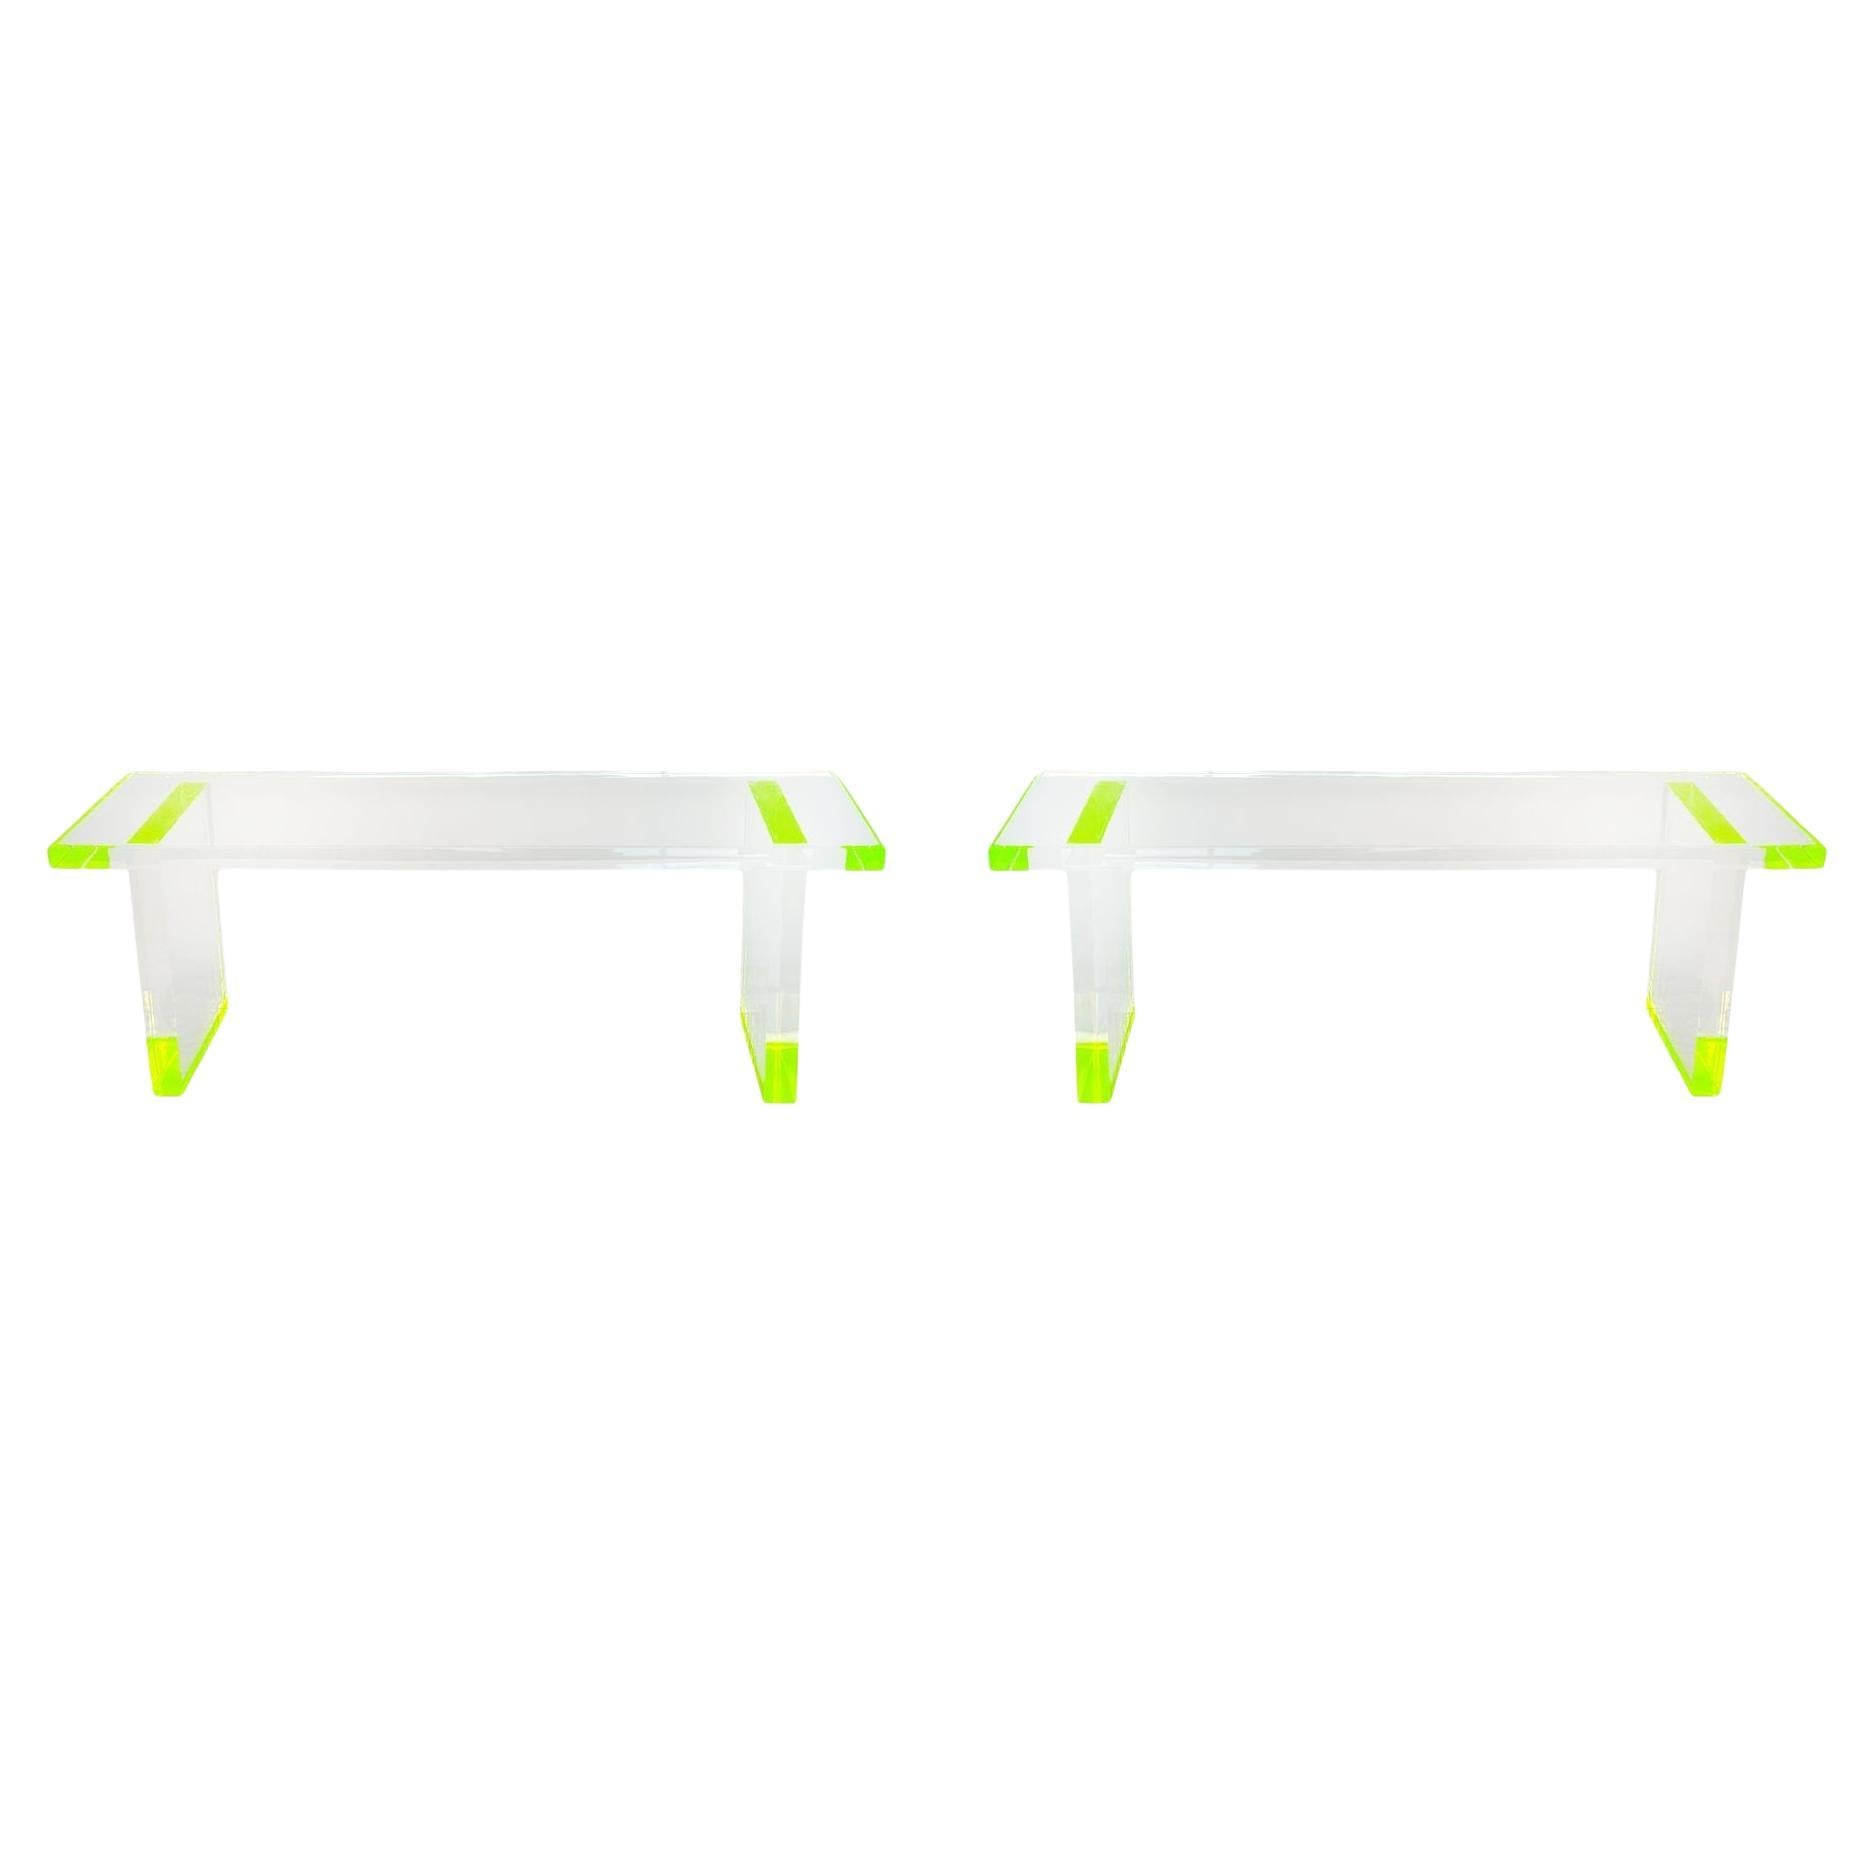 Pair of Modern Lucite Benches w/ Fluorescent Green Details by Pegaso Gallery